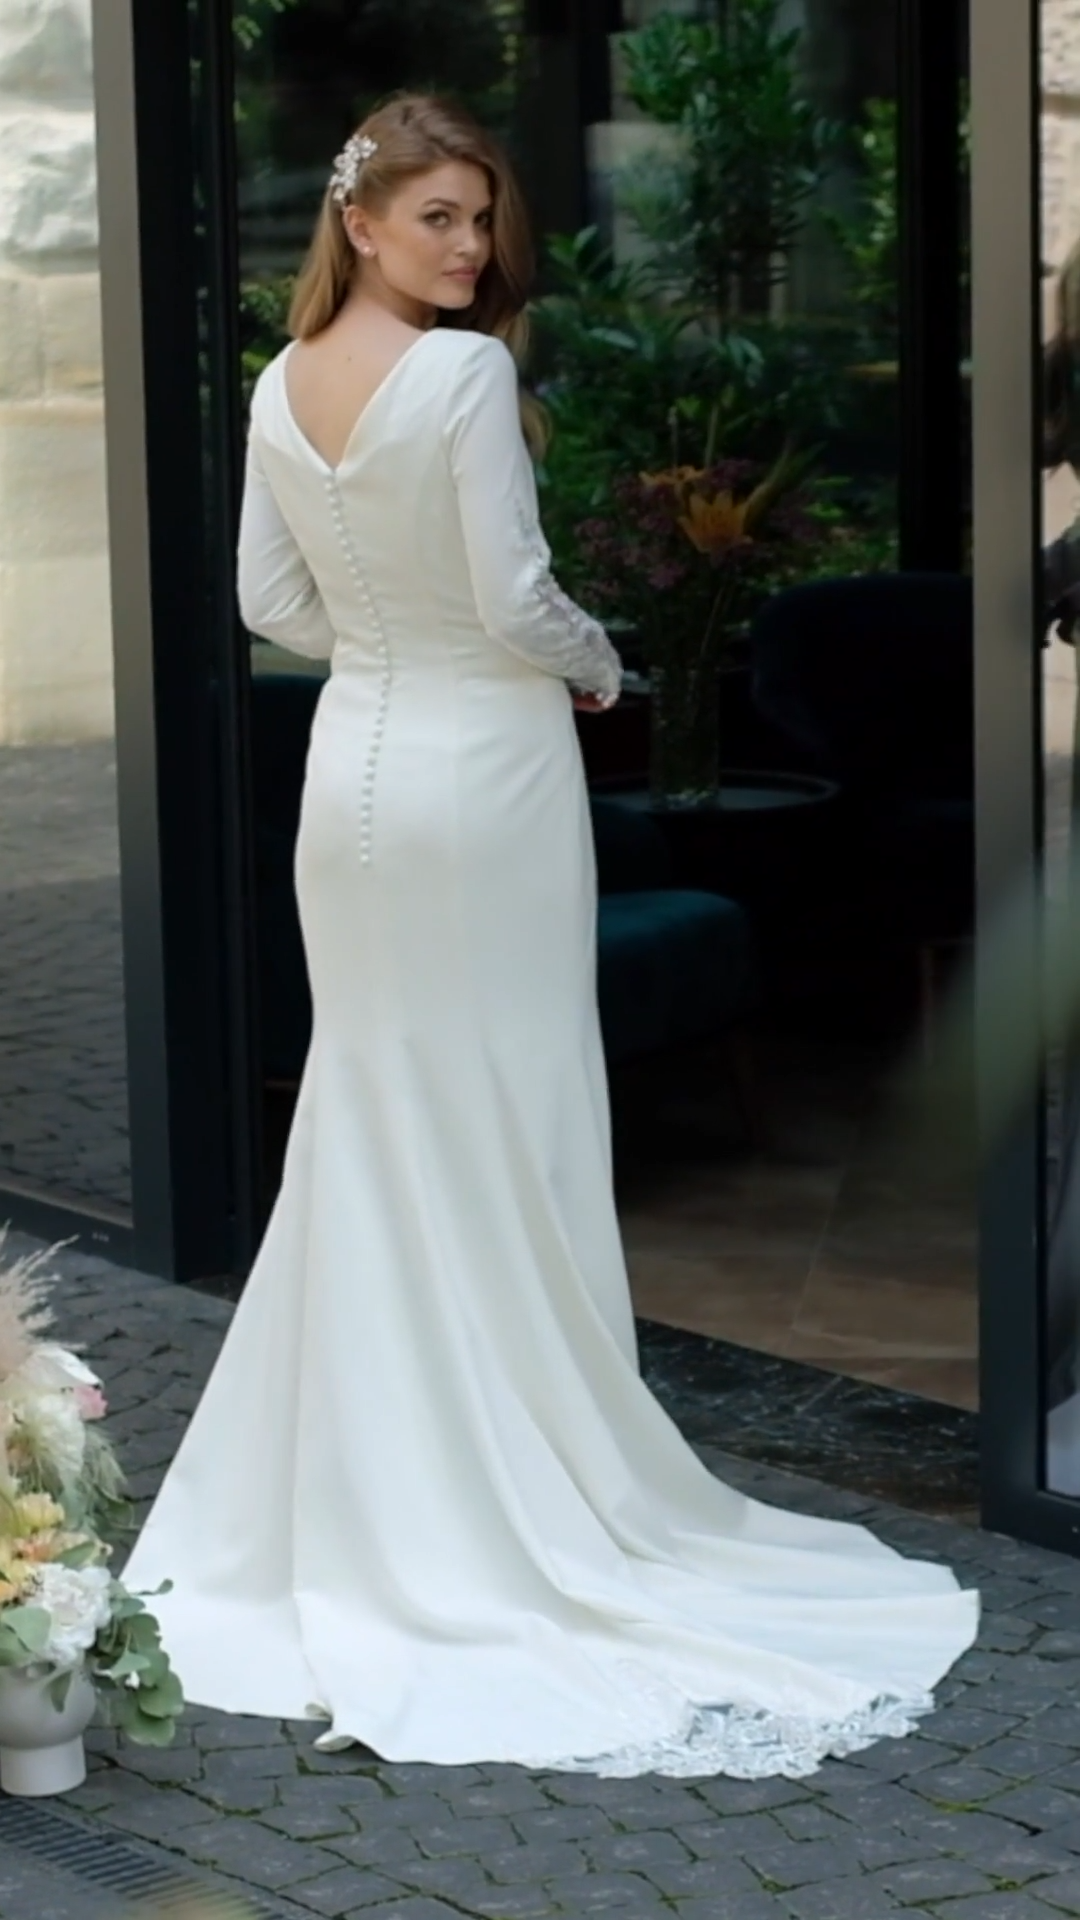 Modest Crepe Mermaid Wedding Dress With V-neckline and Long Illusion Lace Cut-out Sleeves Style M5045